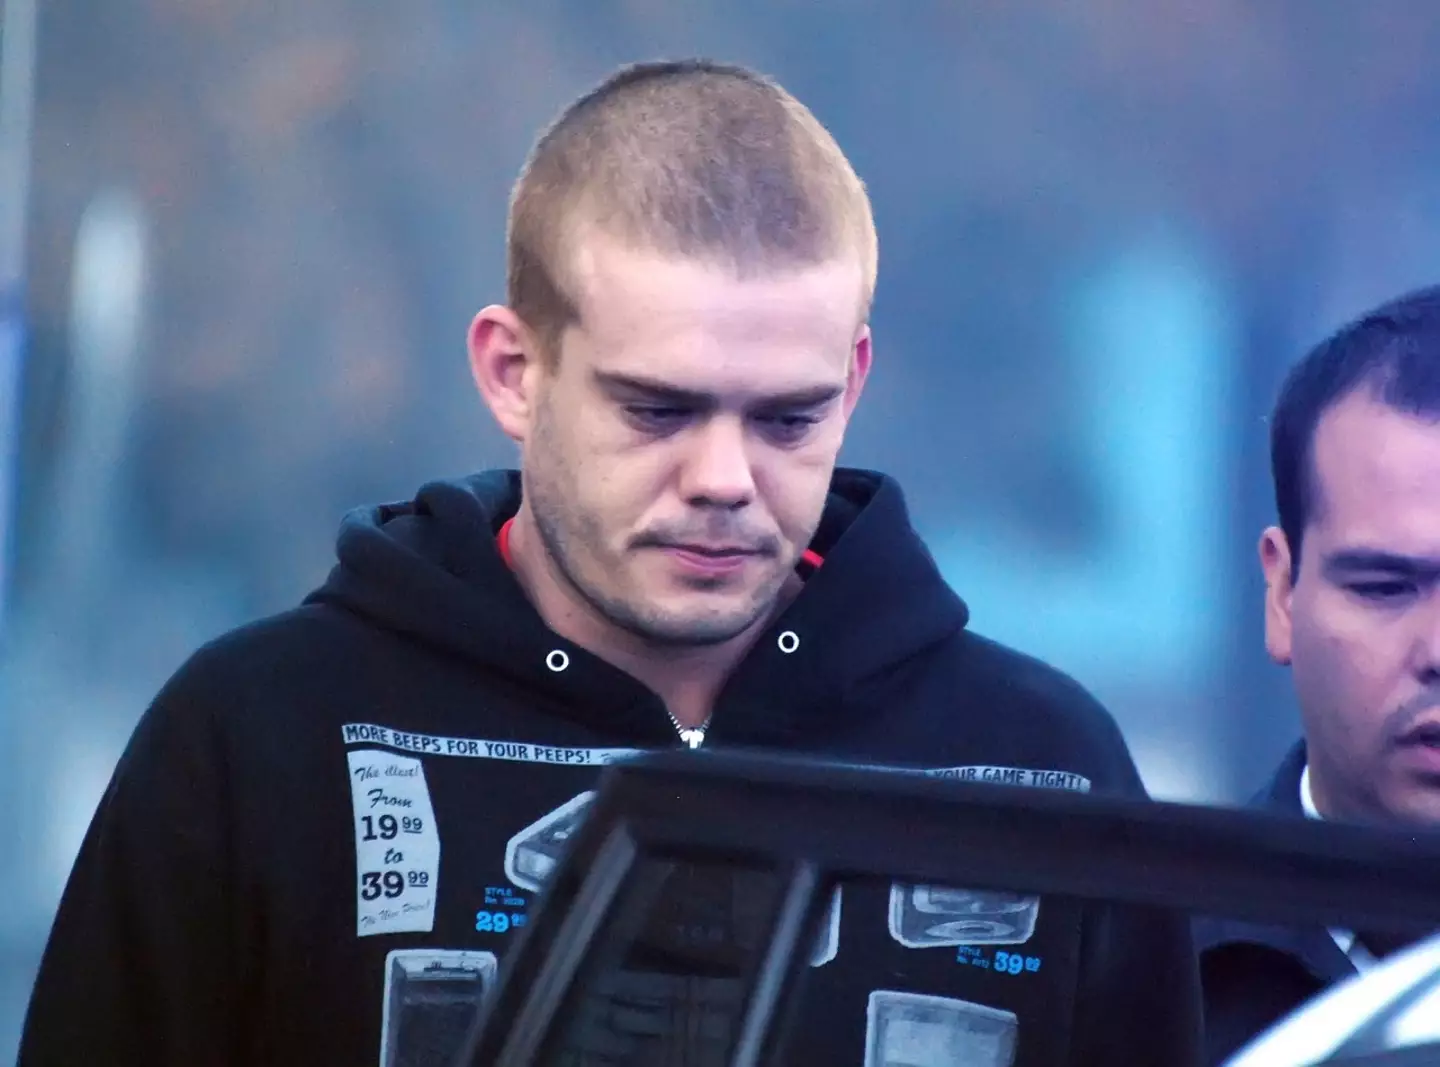 A Peruvian judge has confirmed that Joran van der Sloot's planned extradition from Peru to the US, will go ahead.